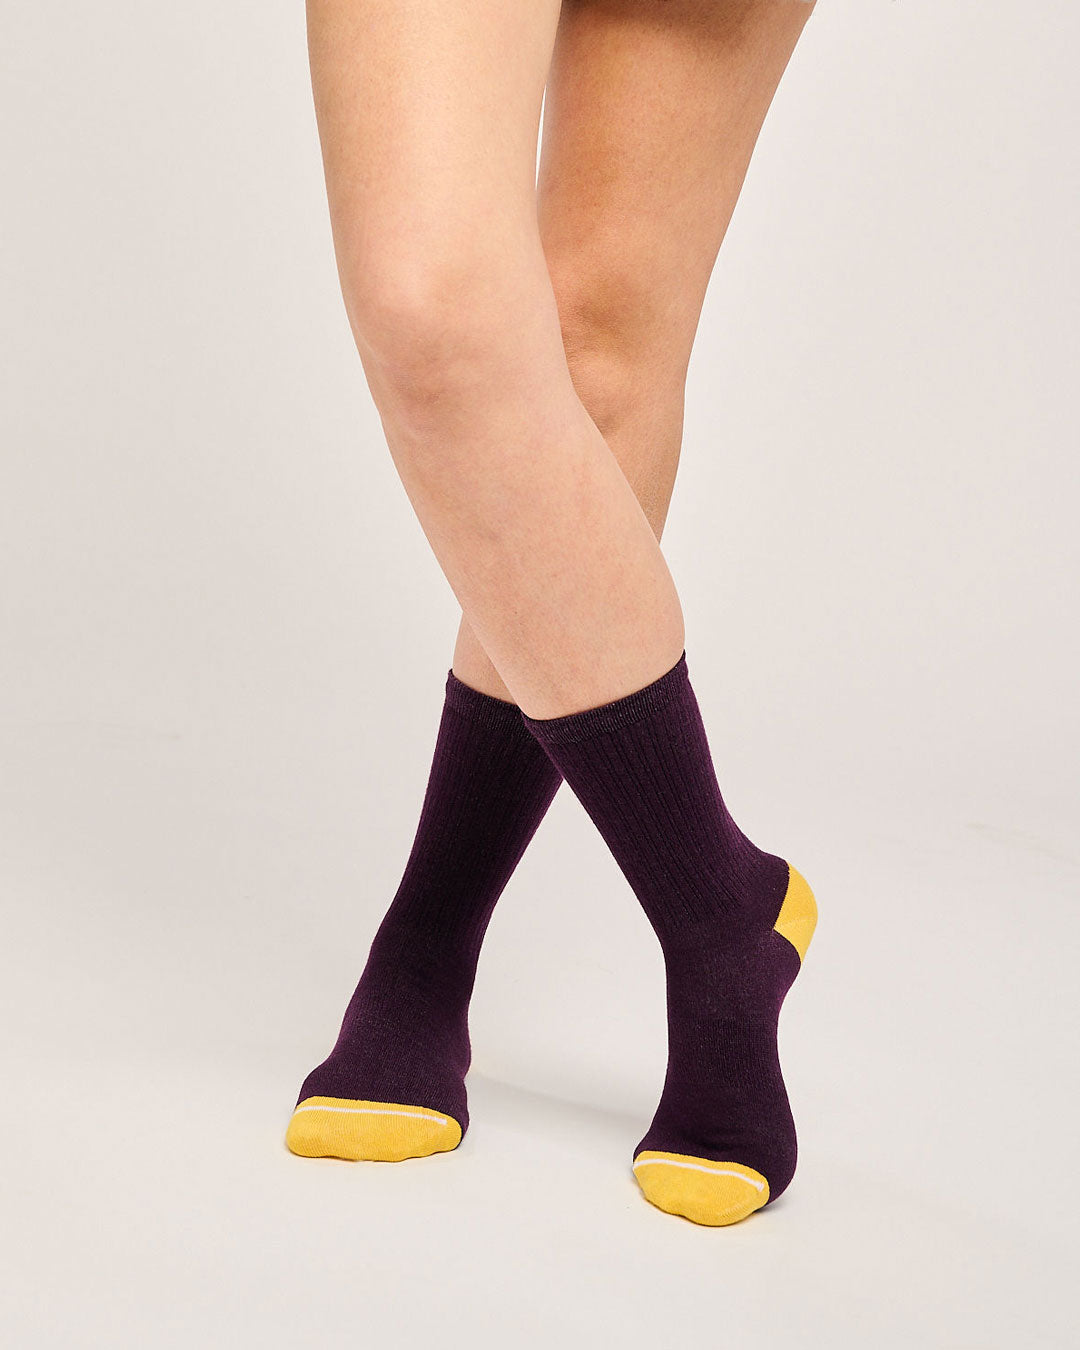 Sustainable welly boot socks. Seamless toe socks with arch support